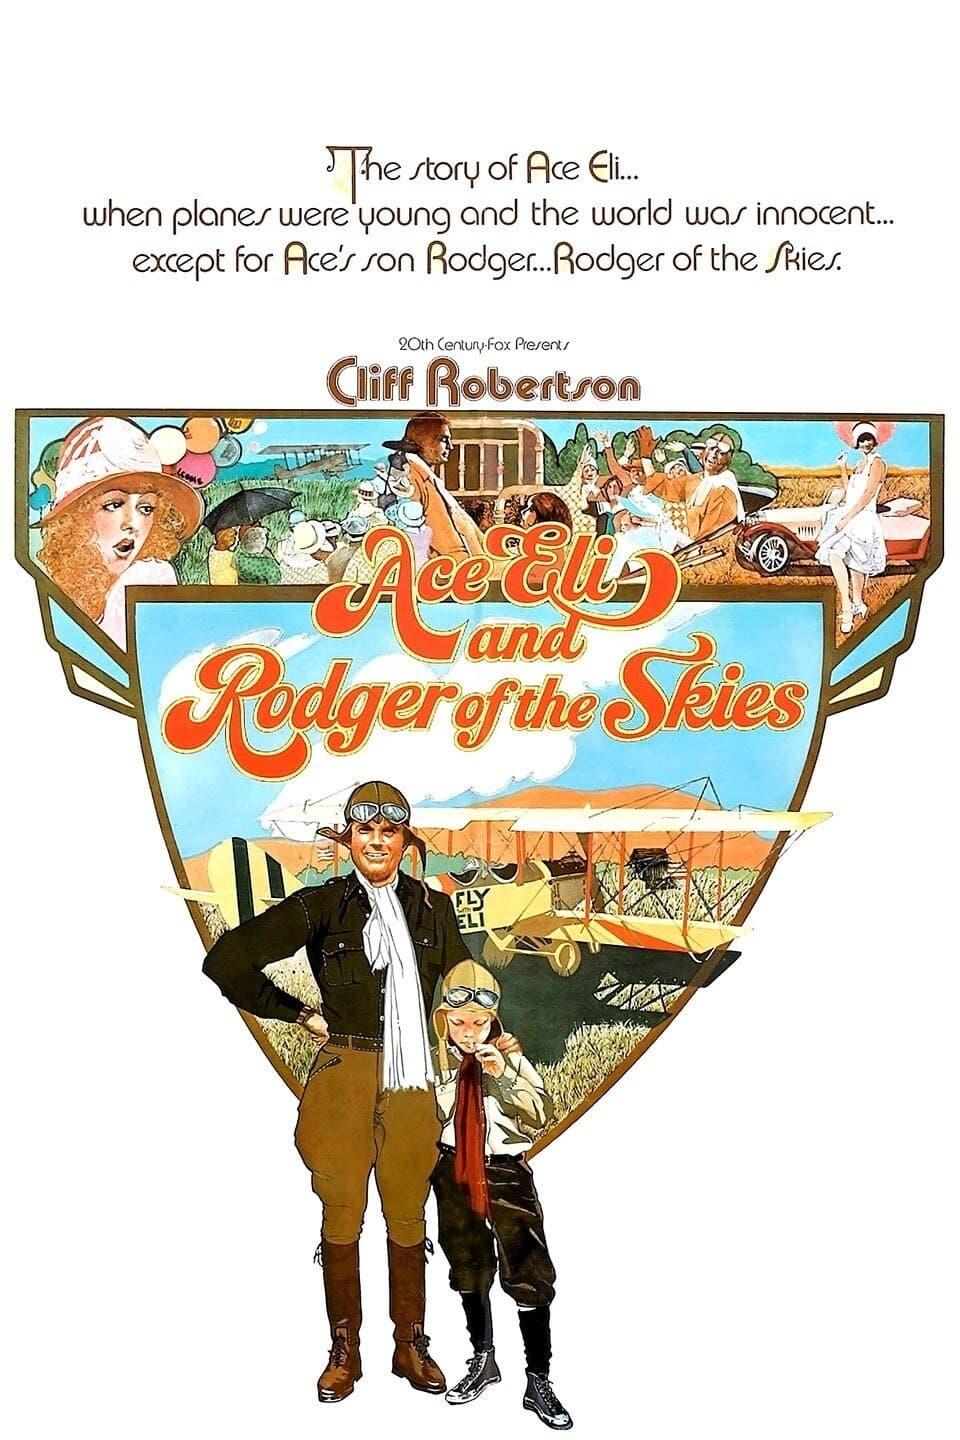 Ace Eli and Rodger of the Skies poster